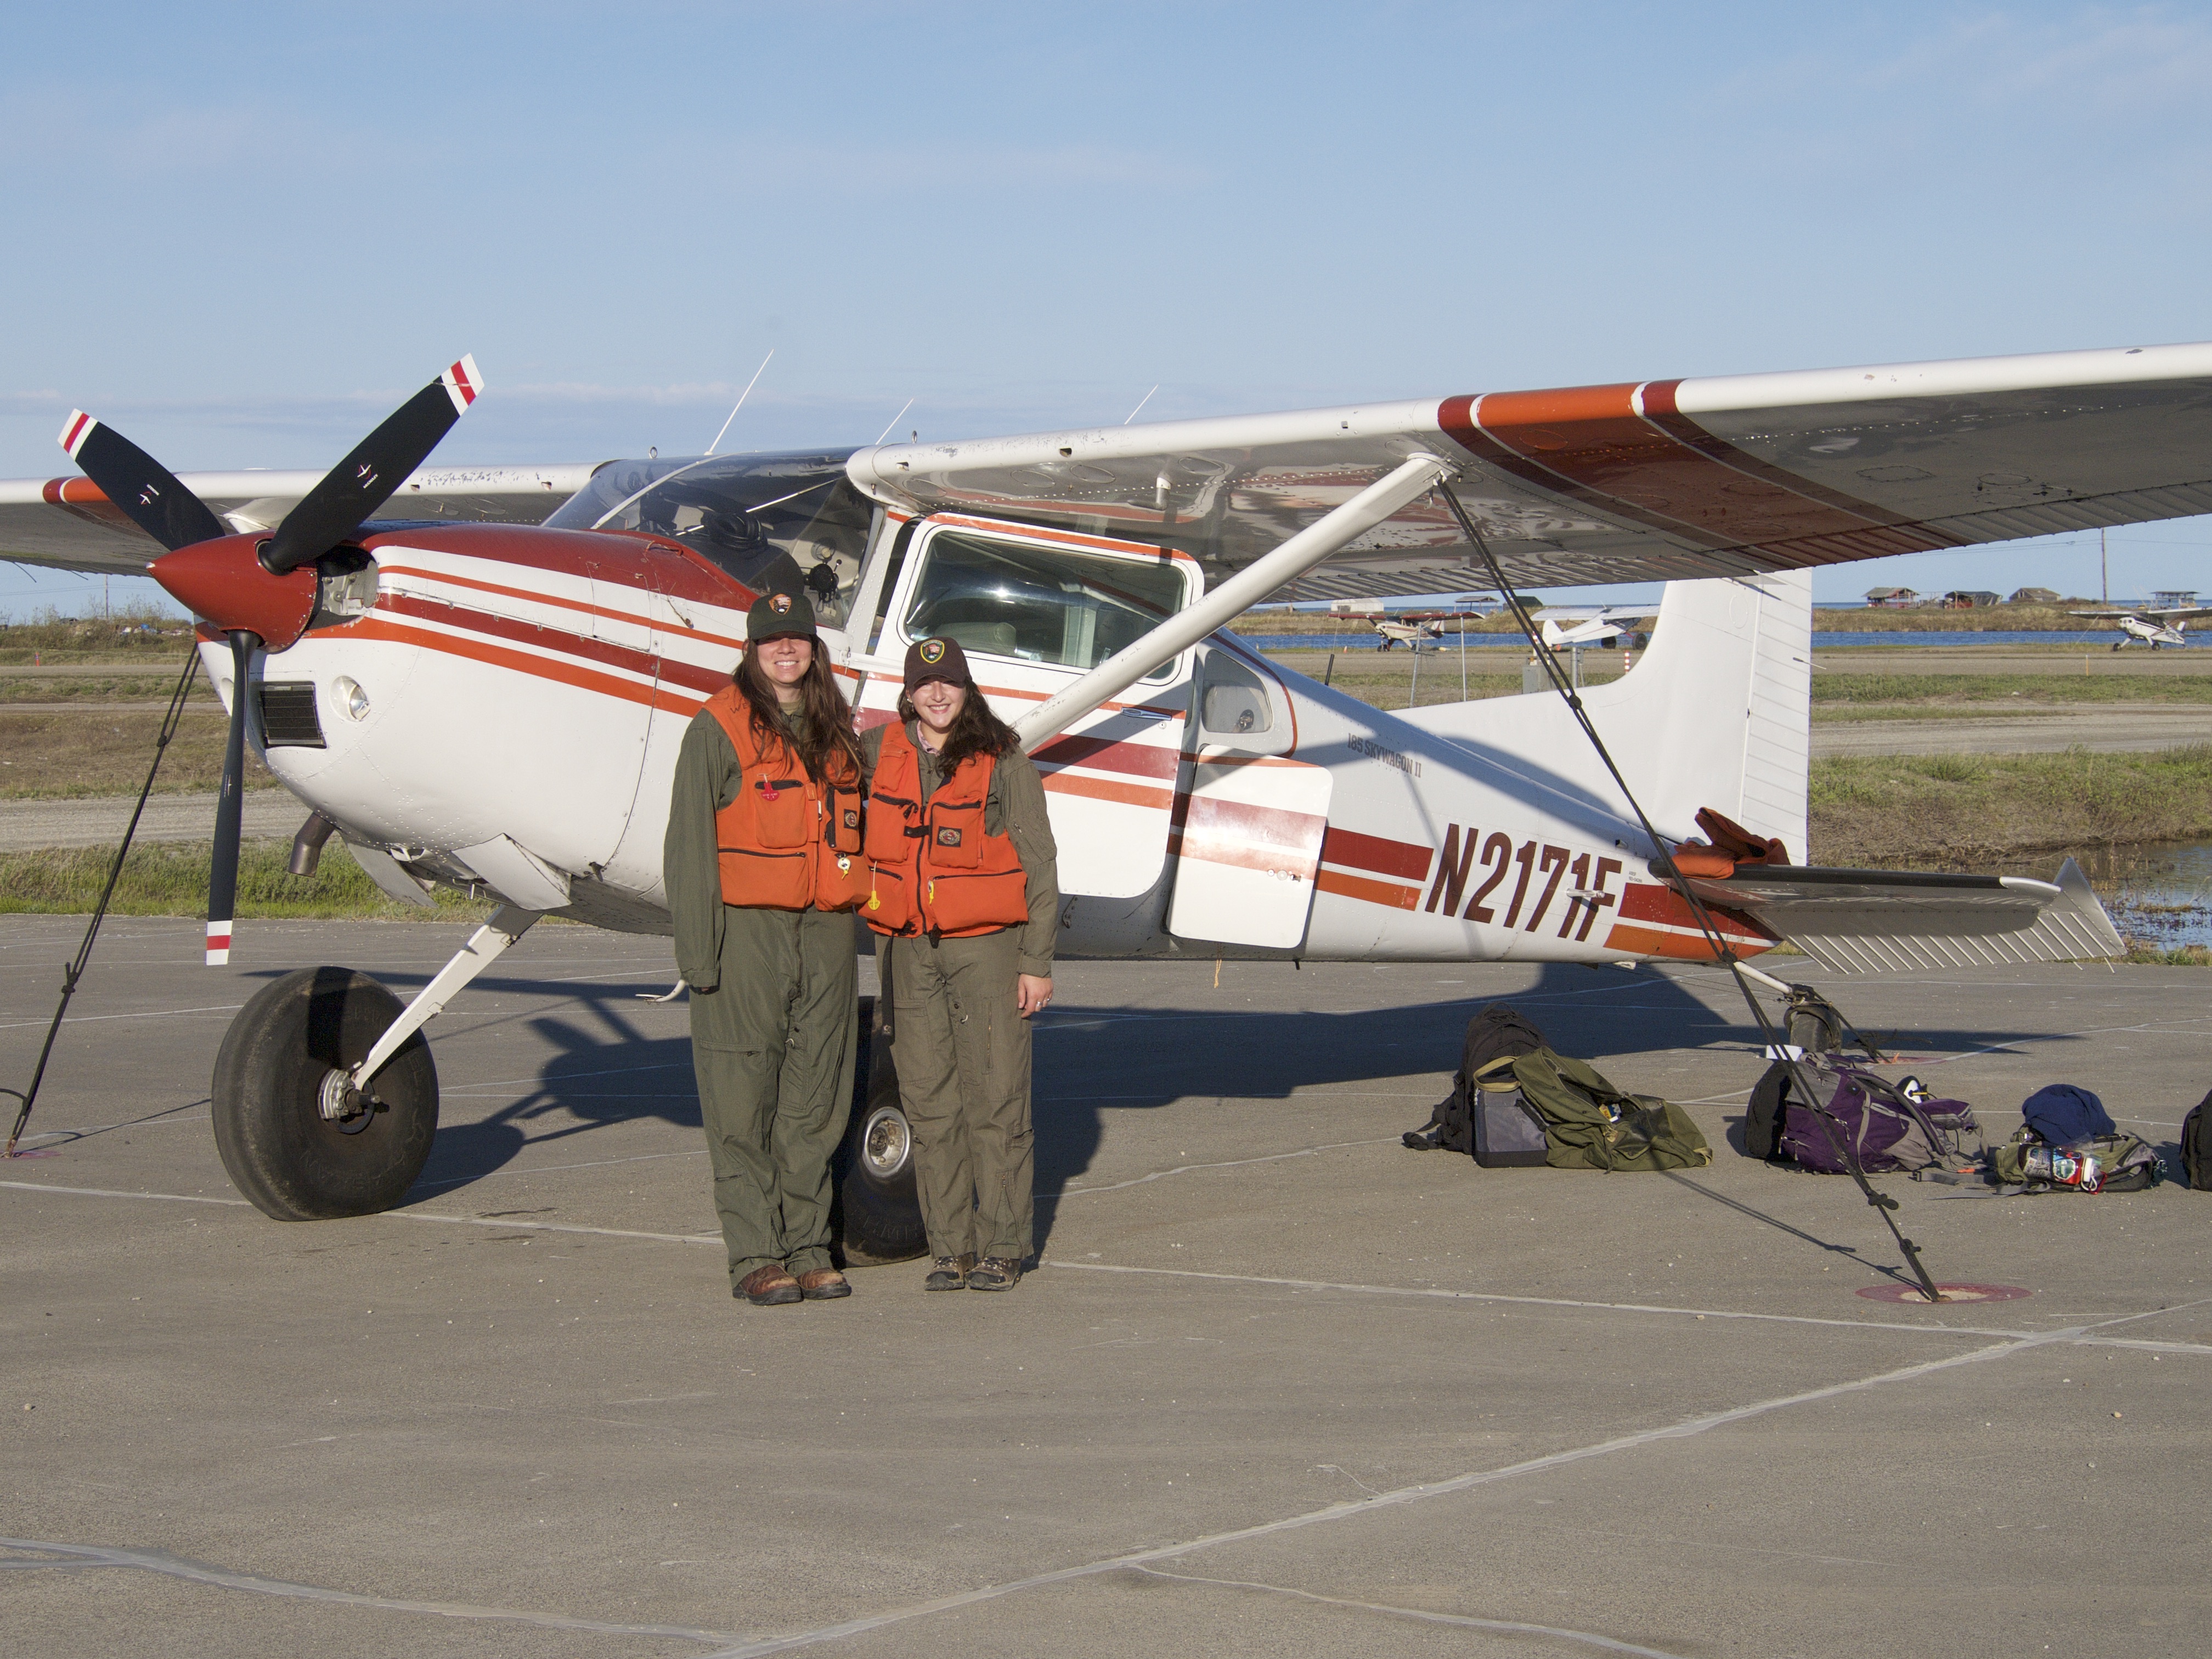 Two park service staff pose next to a small plane.